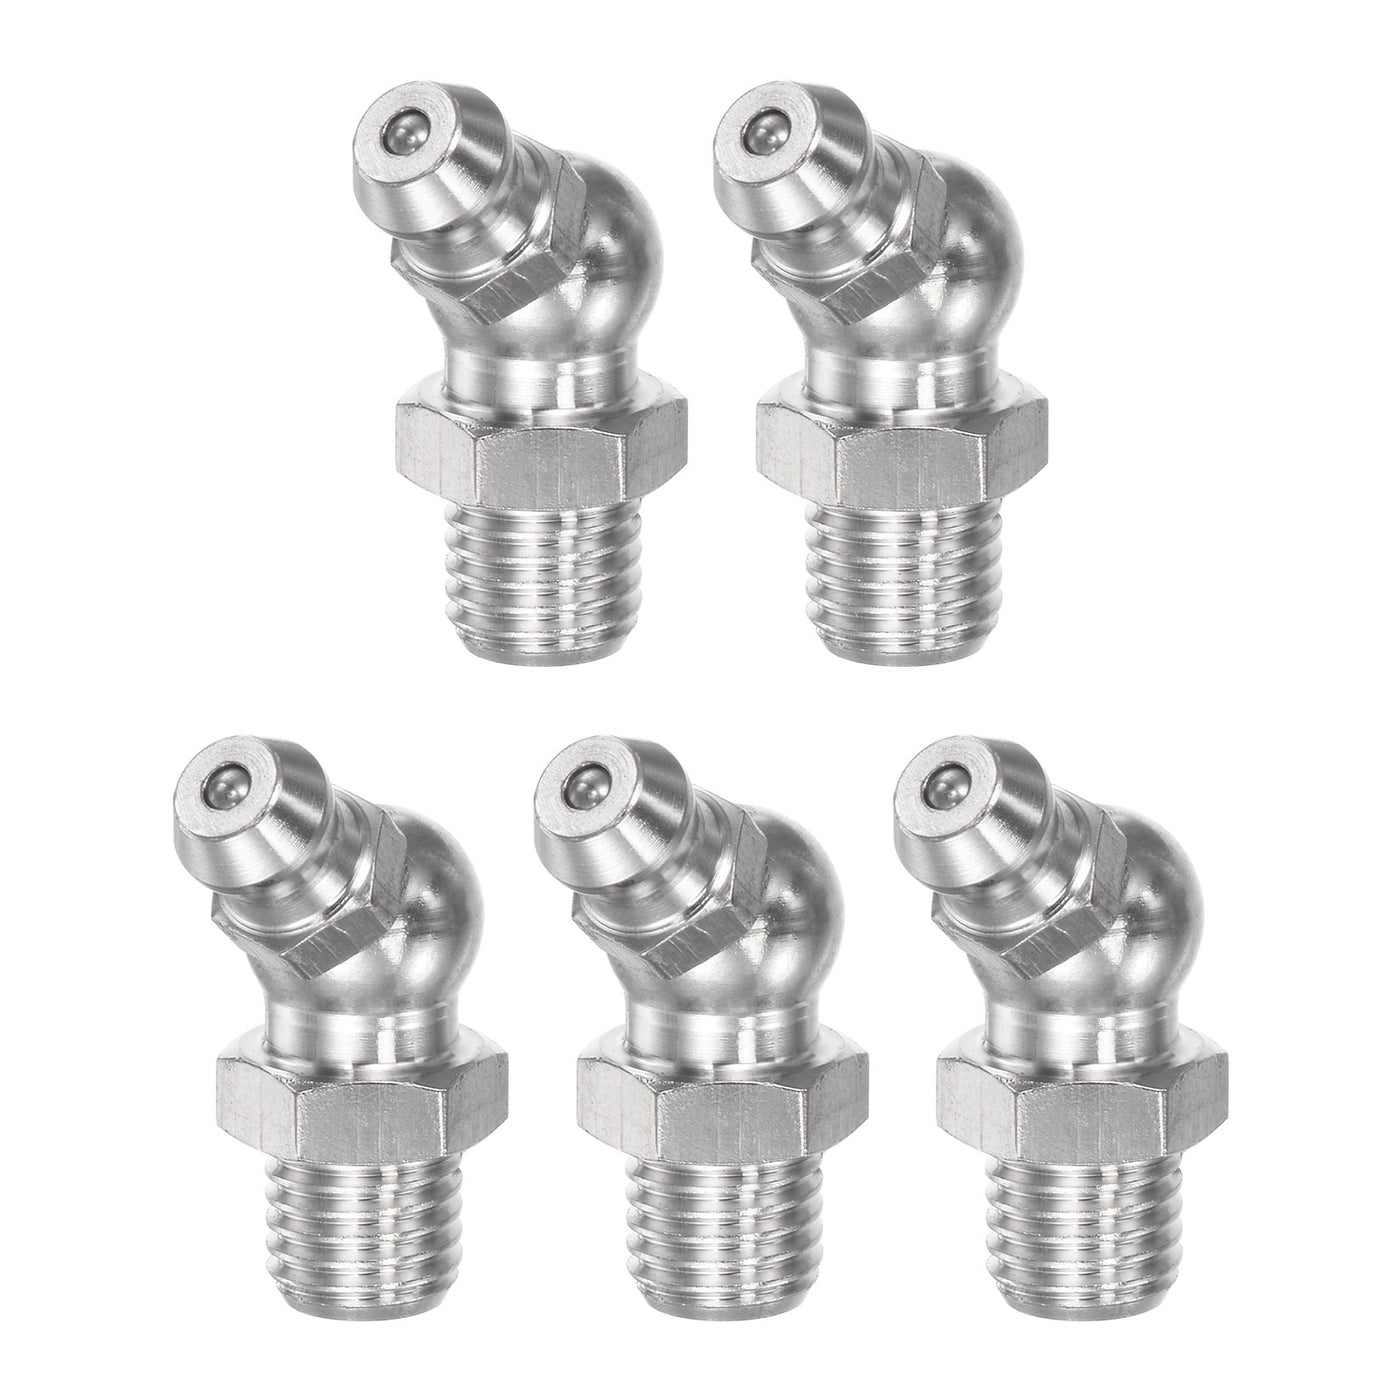 Uxcell Uxcell 304 Stainless Steel 45 Degree Hydraulic Grease Fitting M10 x 1mm Thread, 5Pcs